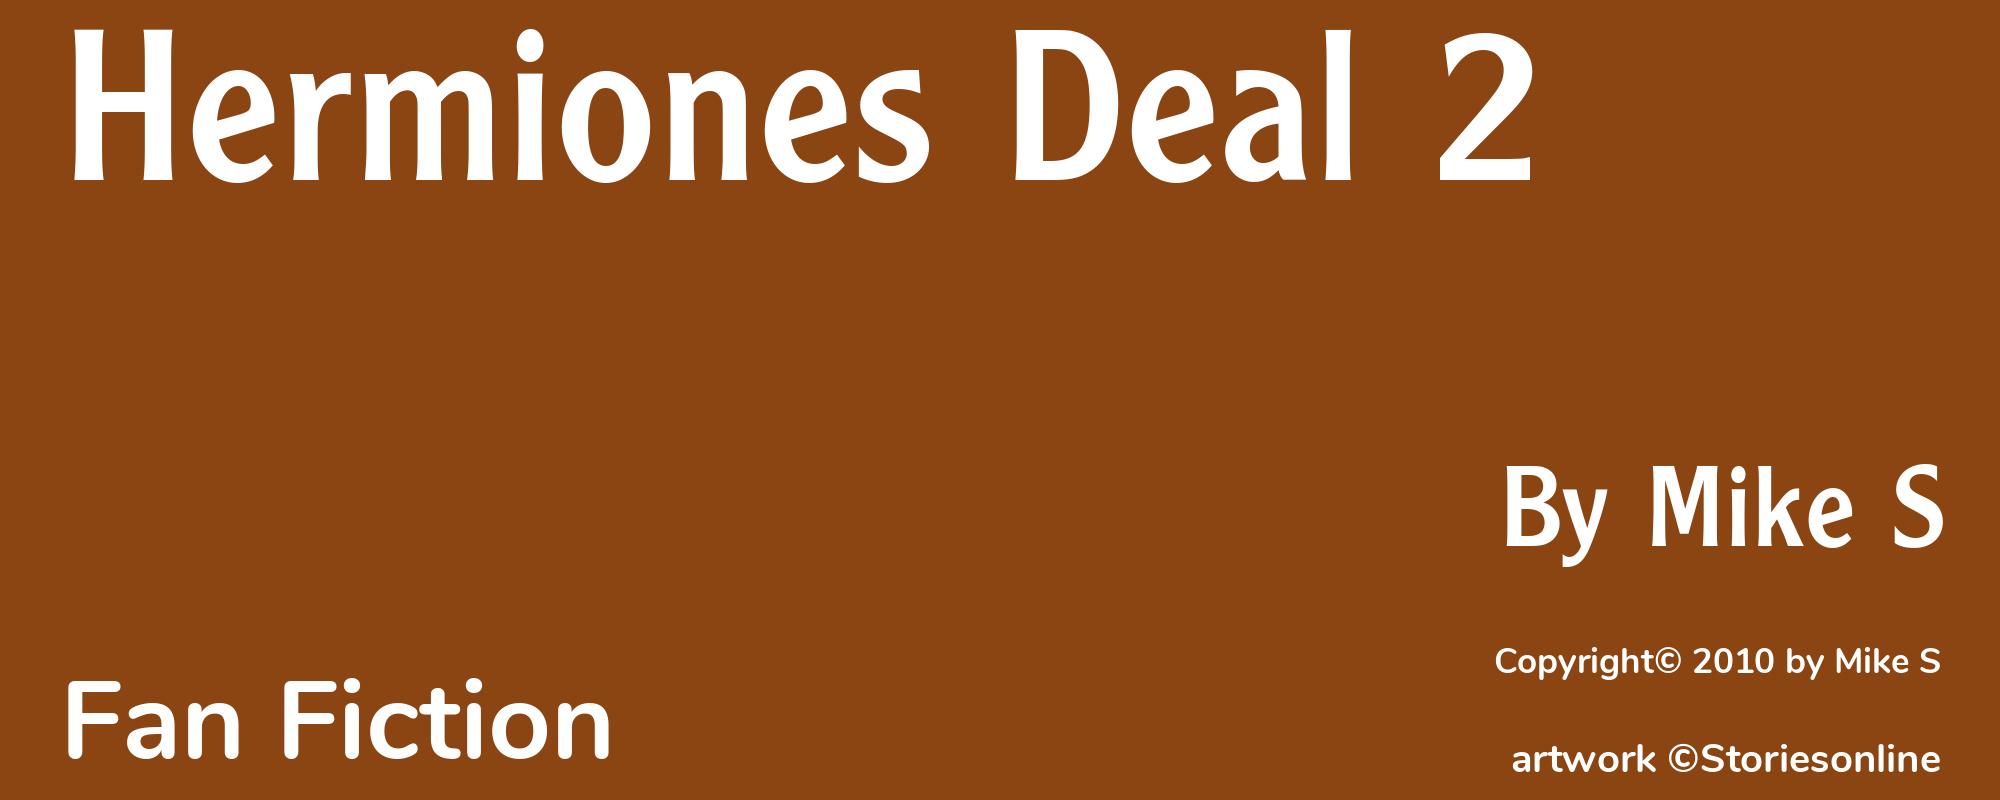 Hermiones Deal 2 - Cover